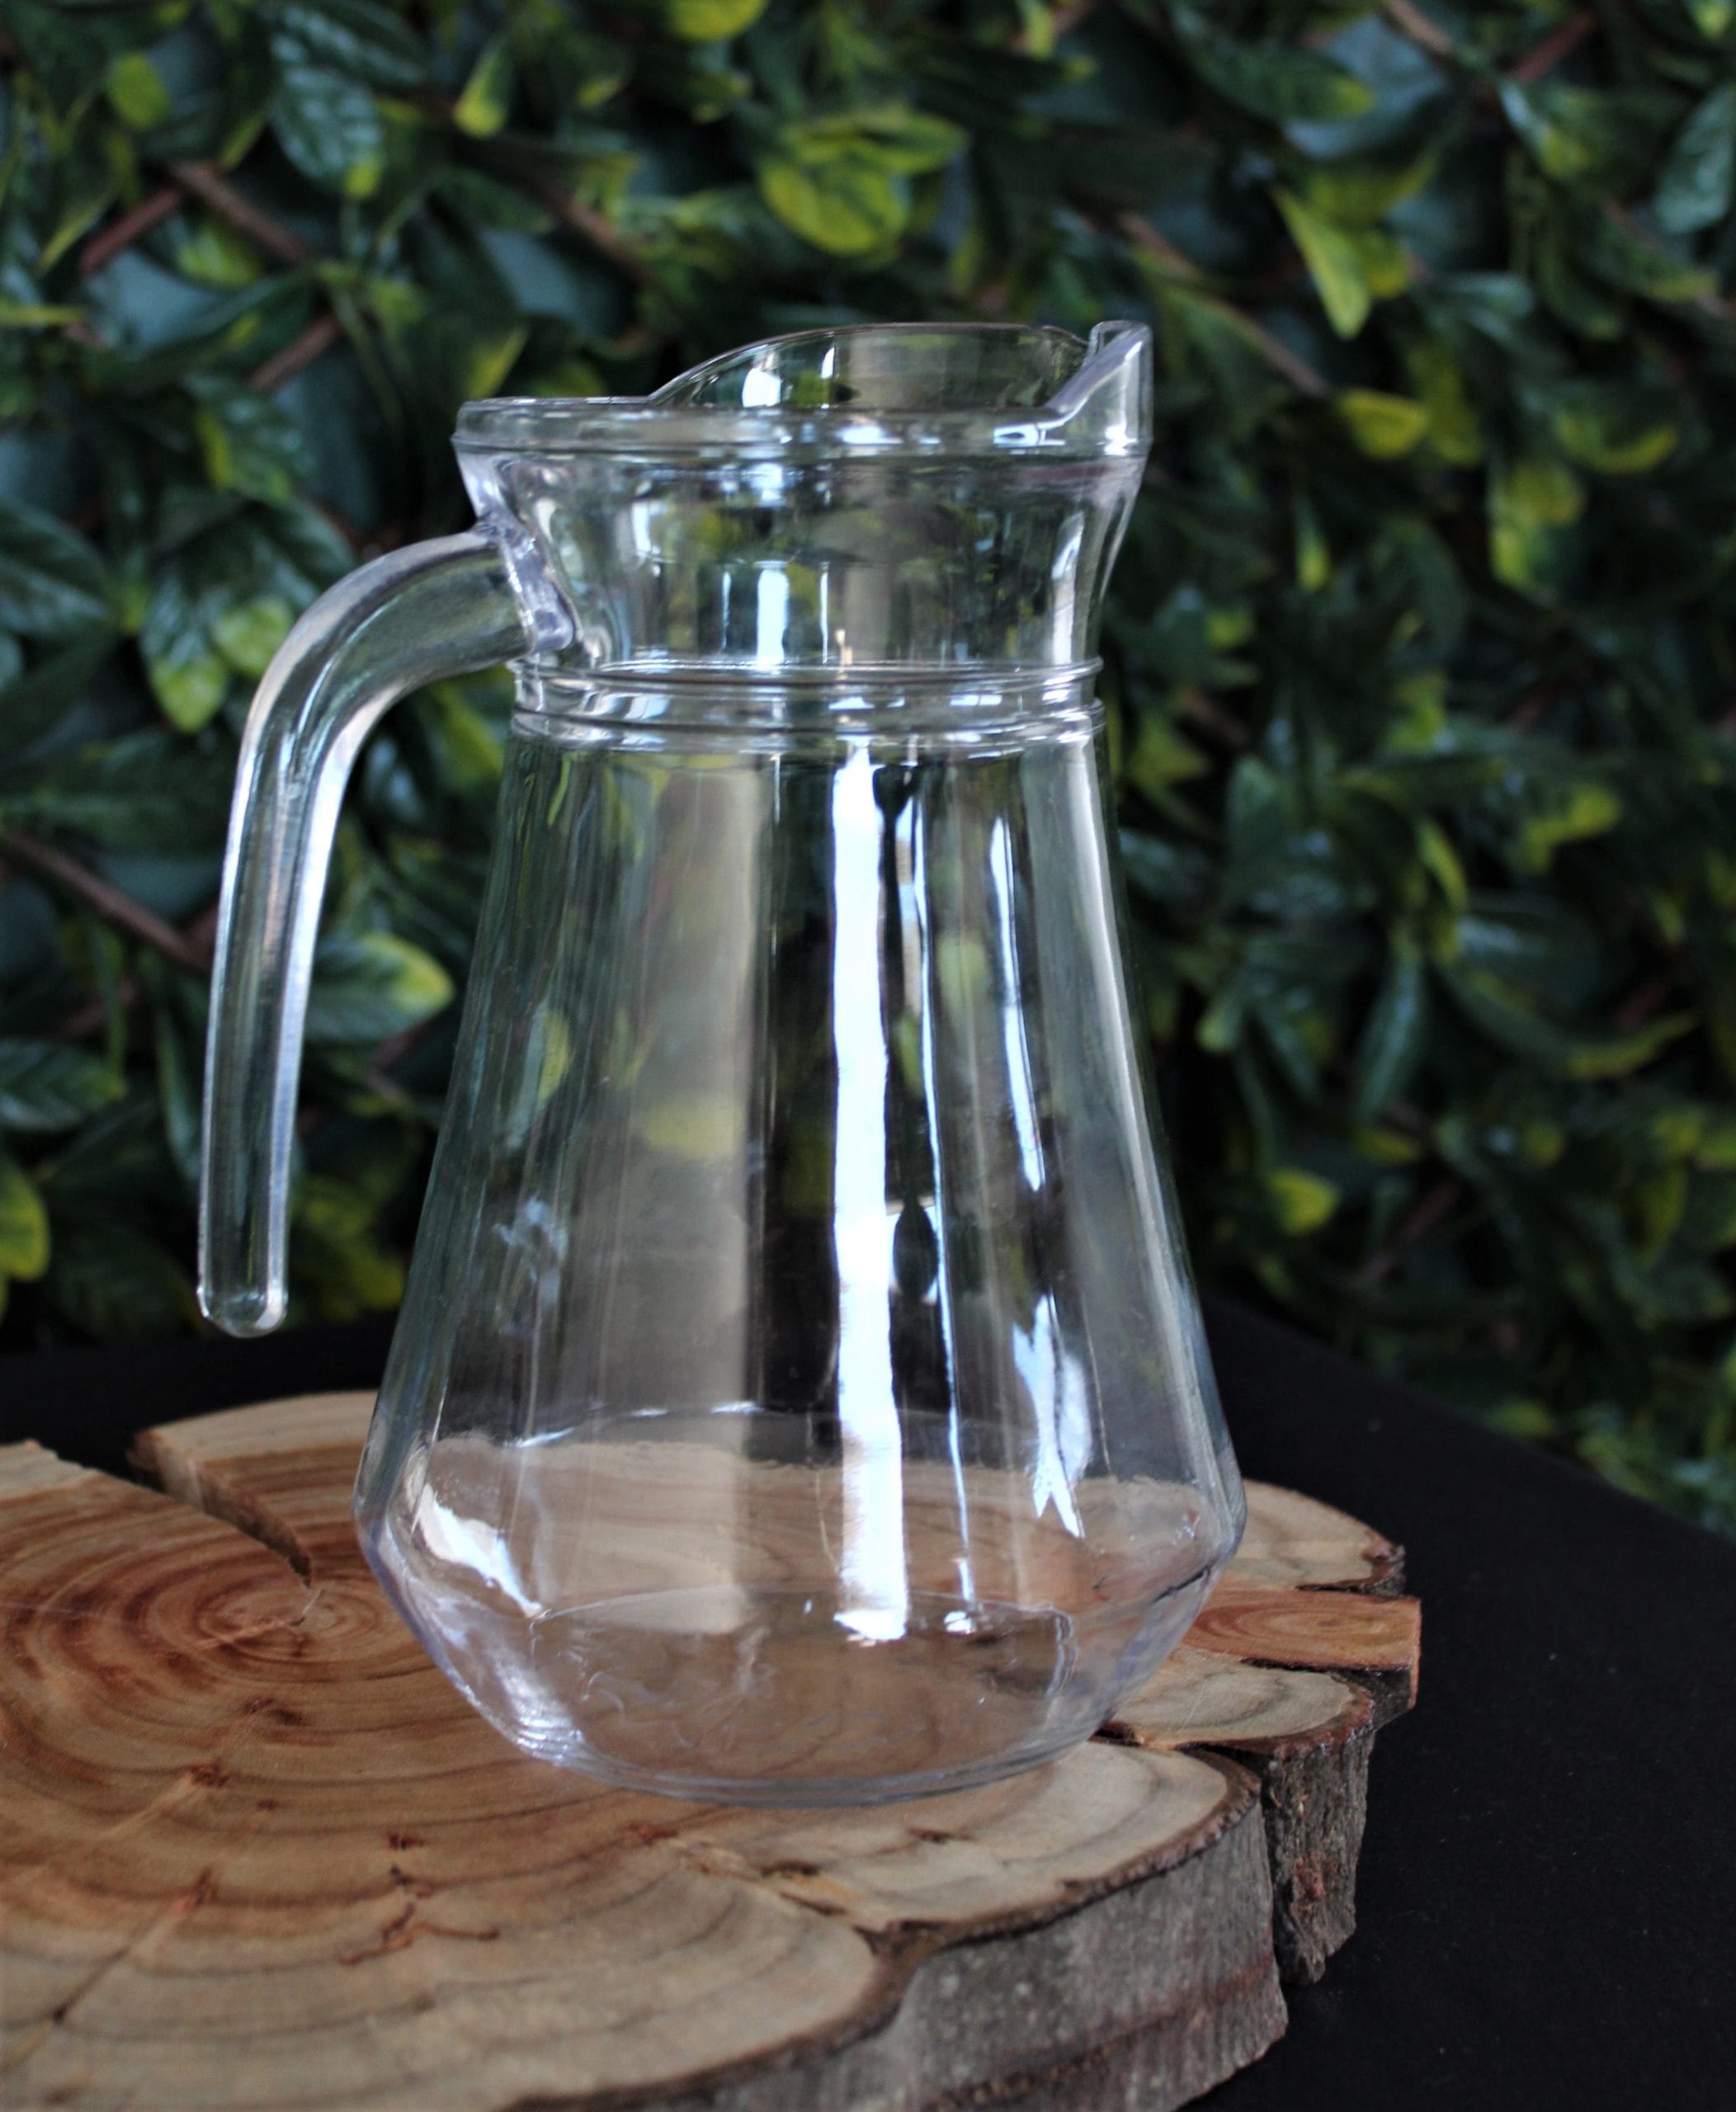 Hour glass Water Jug - 1.25L - Beacall Hospitality Solutions